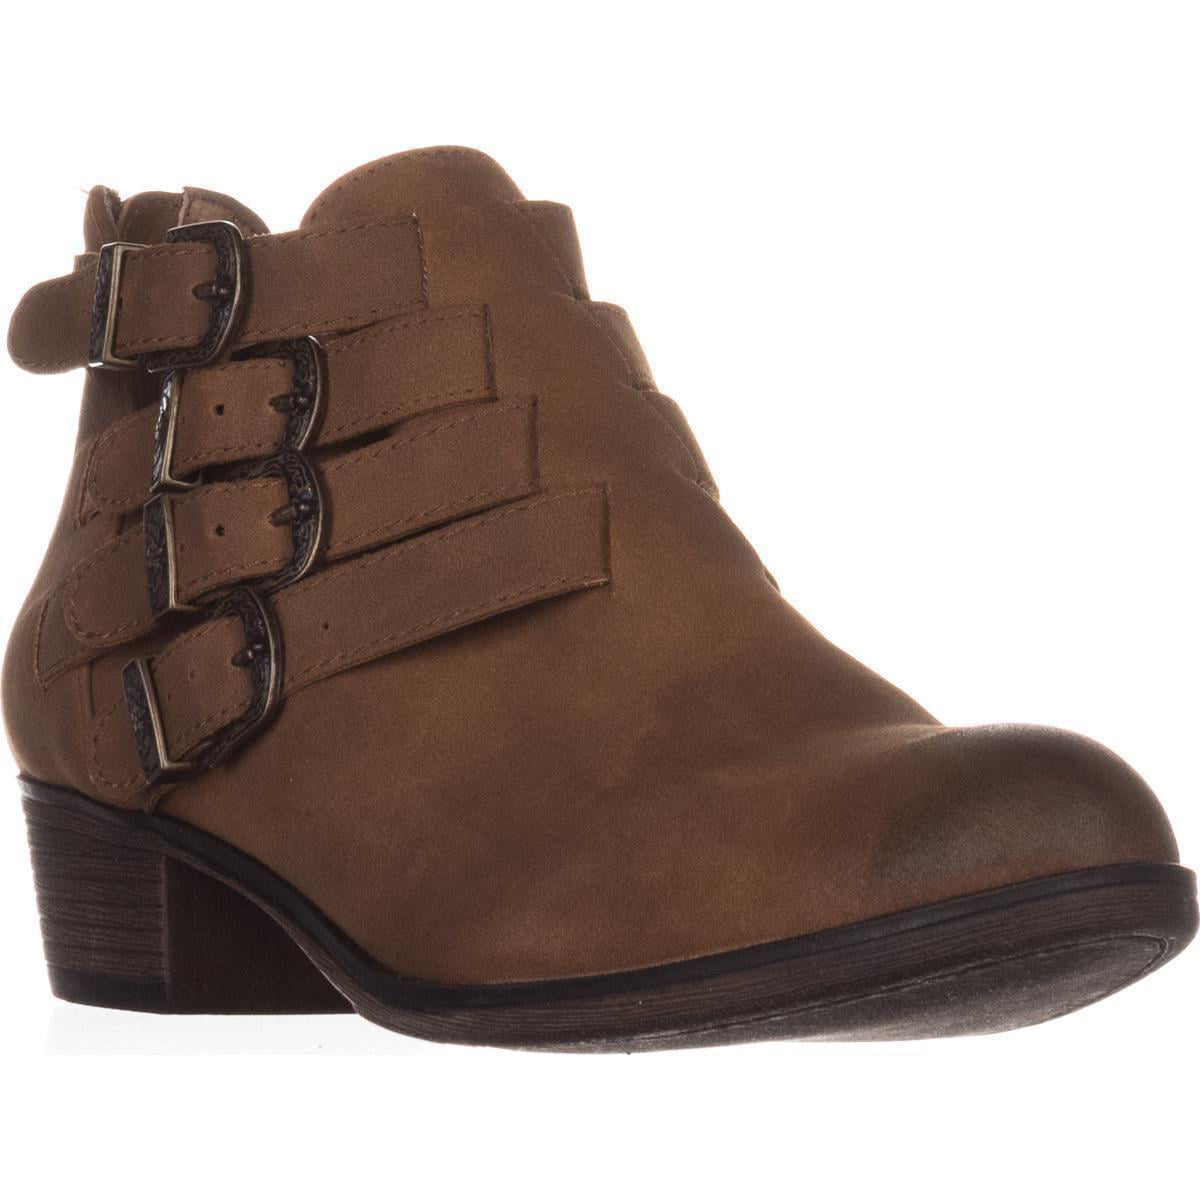 AR35 - Womens AR35 Darie Strappy Casual Ankle Boots, Tan